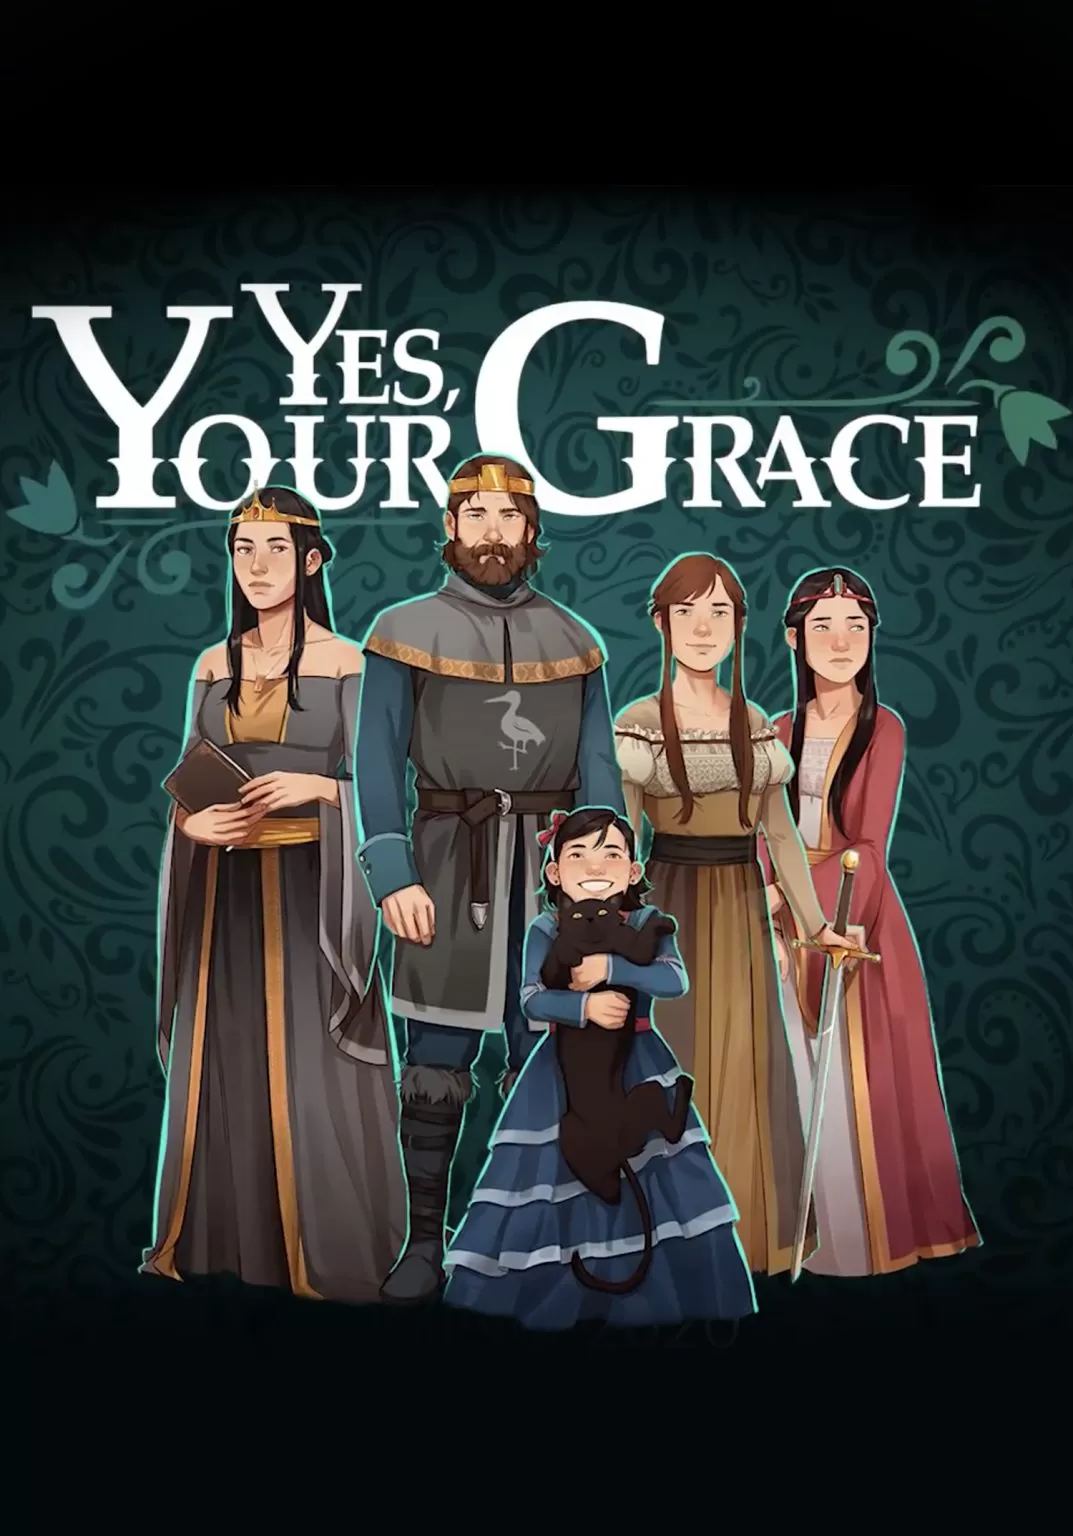 yes-your-grace-pc-game-download-full-version-free-Youtoload.com-โปรแกรมฟรี-2858960014.jpg.webp